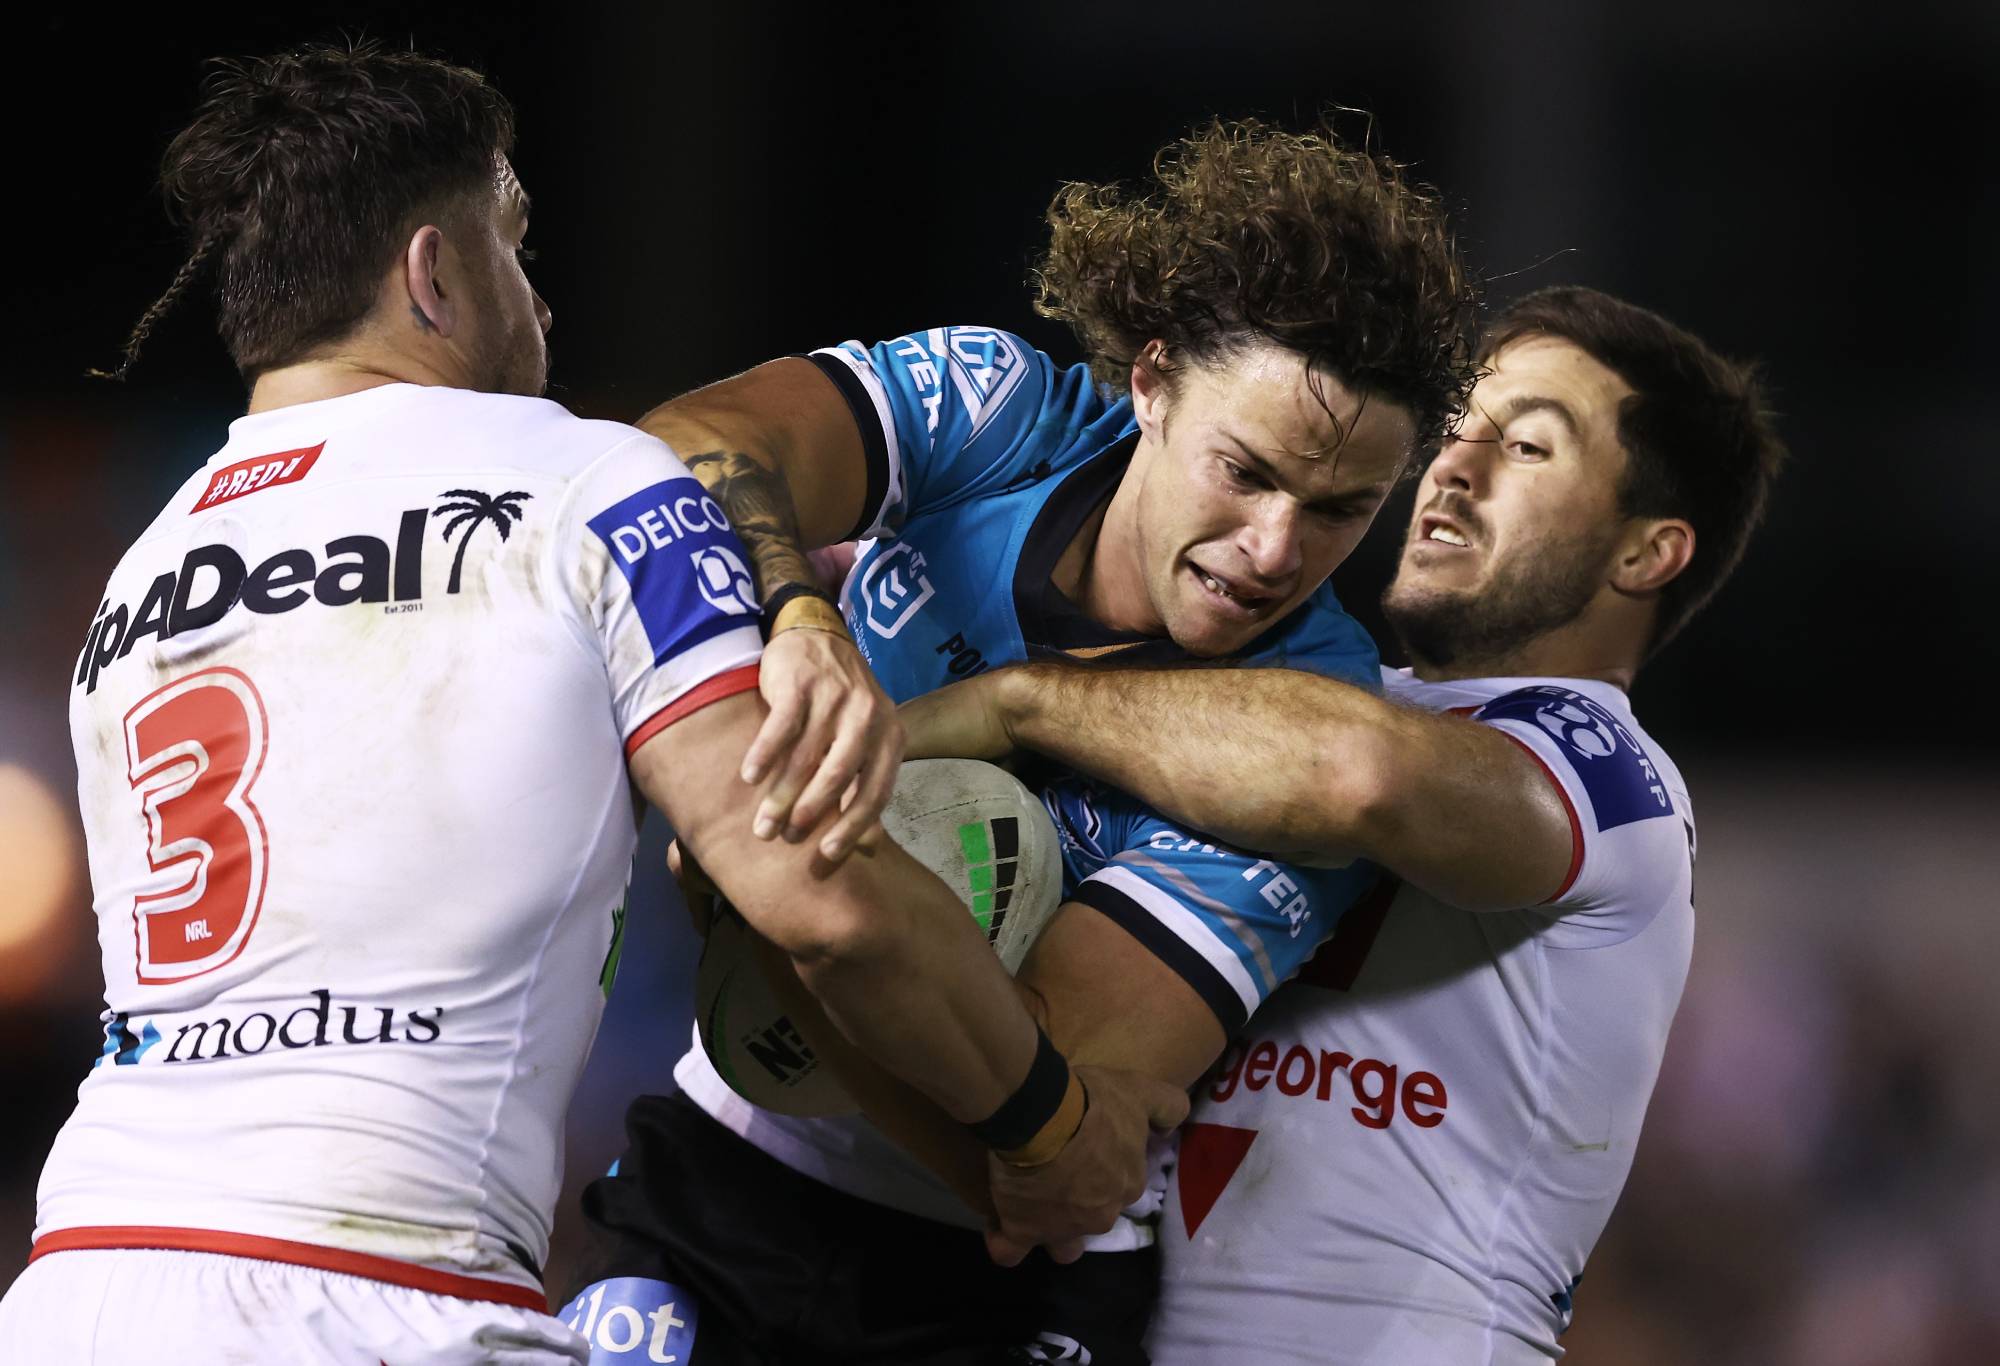 SYDNEY, AUSTRALIA - AUGUST 06: Nicho Hynes of the Sharks is tackled during the round 21 NRL match between the Cronulla Sharks and the St George Illawarra Dragons at PointsBet Stadium, on August 06, 2022, in Sydney, Australia. (Photo by Matt King/Getty Images)